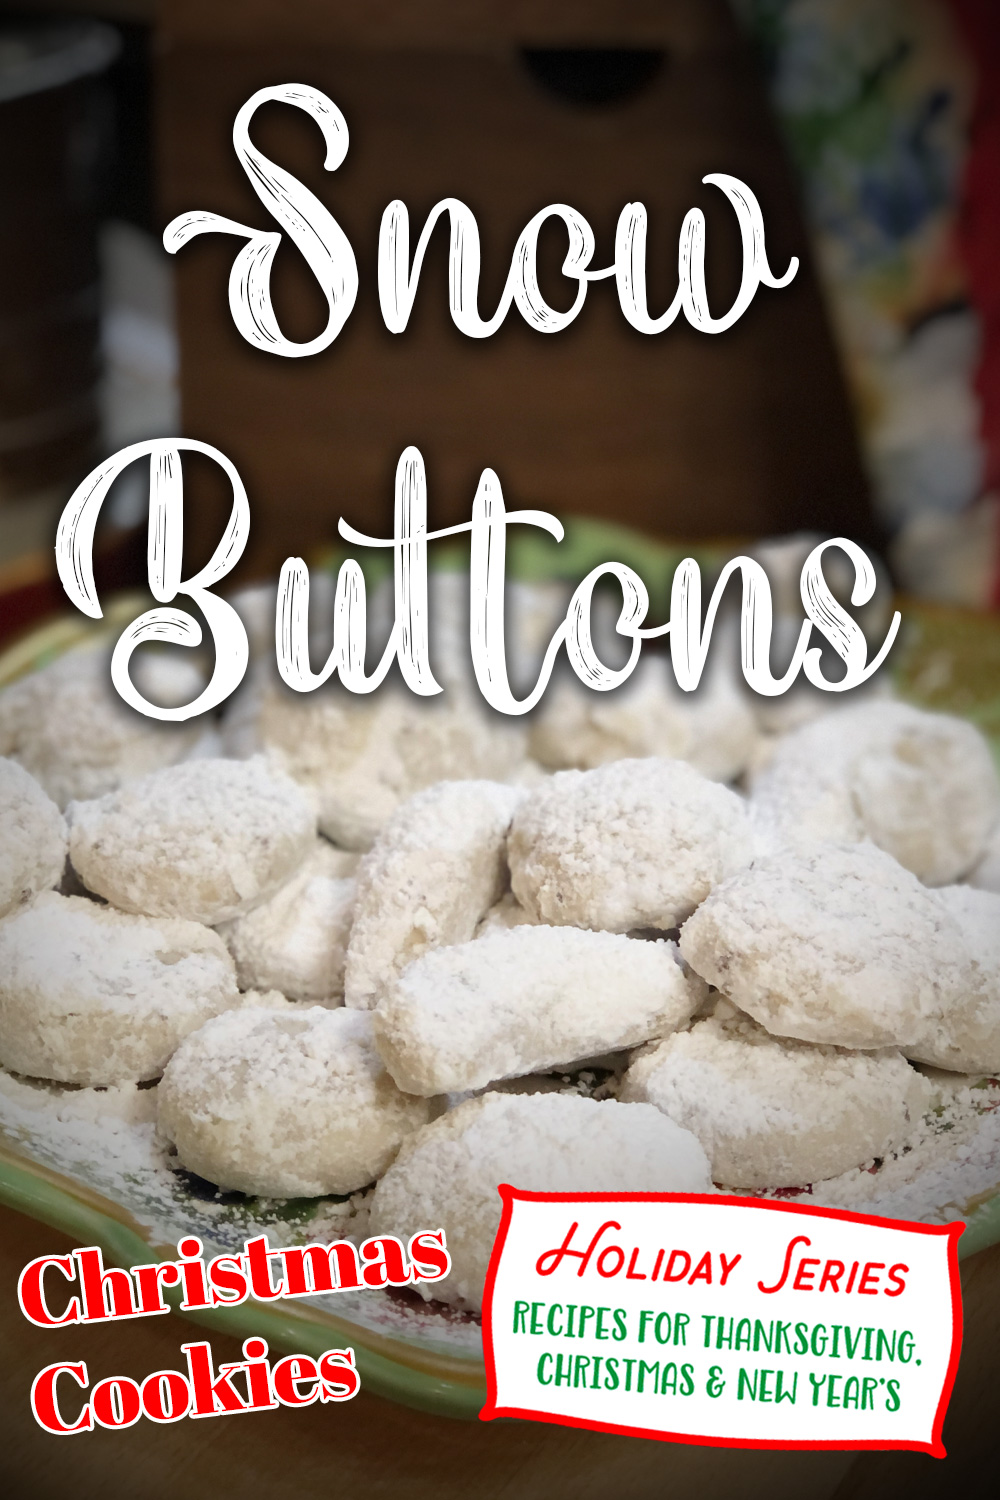 Snow Buttons (aka Mexican Wedding Cookies, Snowballs, Christmas Cookies)